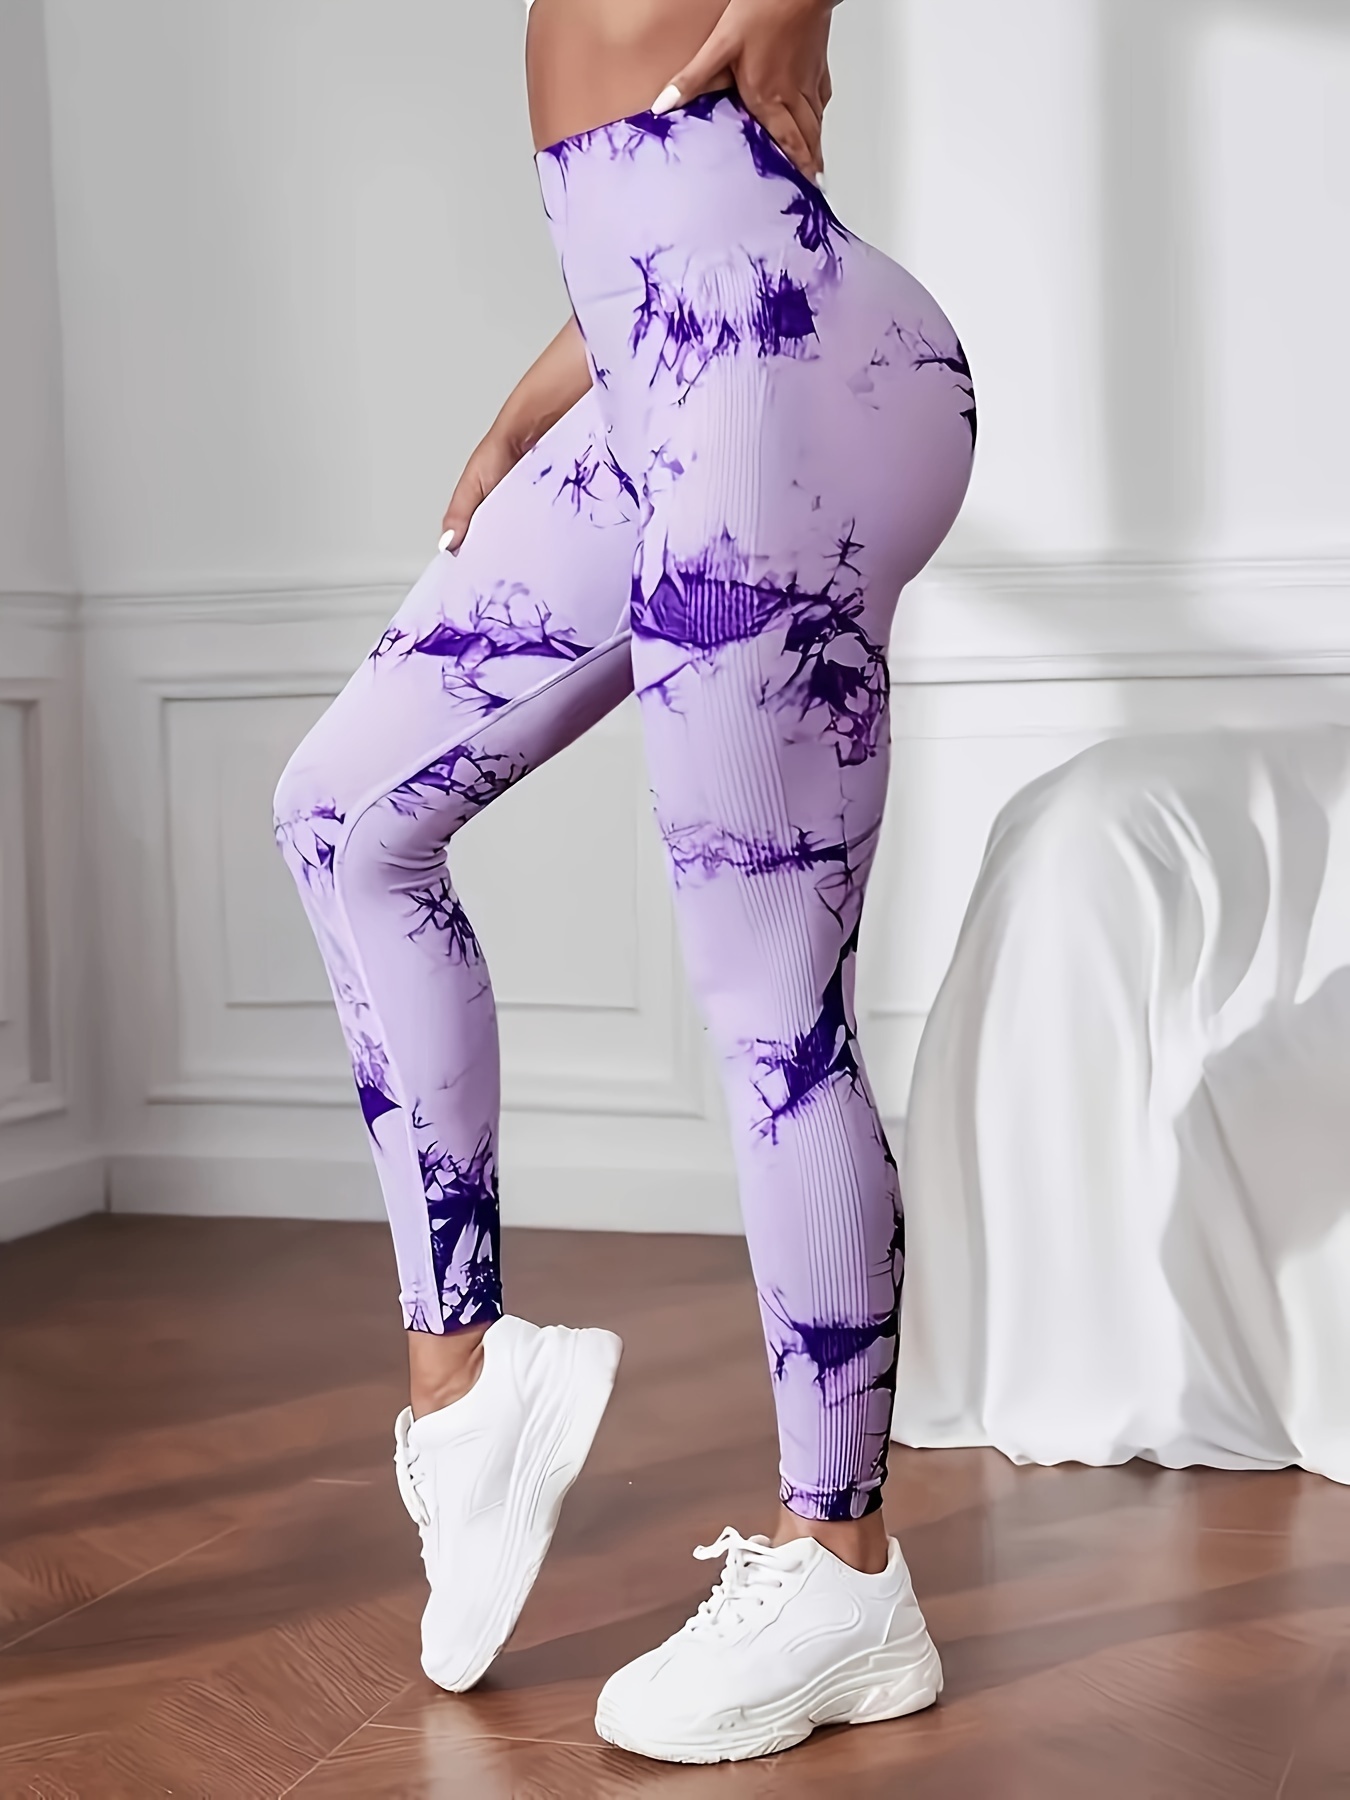 Purple, M) Tie Dye Yoga Pants - Push Up Gym Leggings - Seamless Sports  Tights for Women - Fitness Legging with Butt Lifting Design - Running Workout  Leggings for on OnBuy